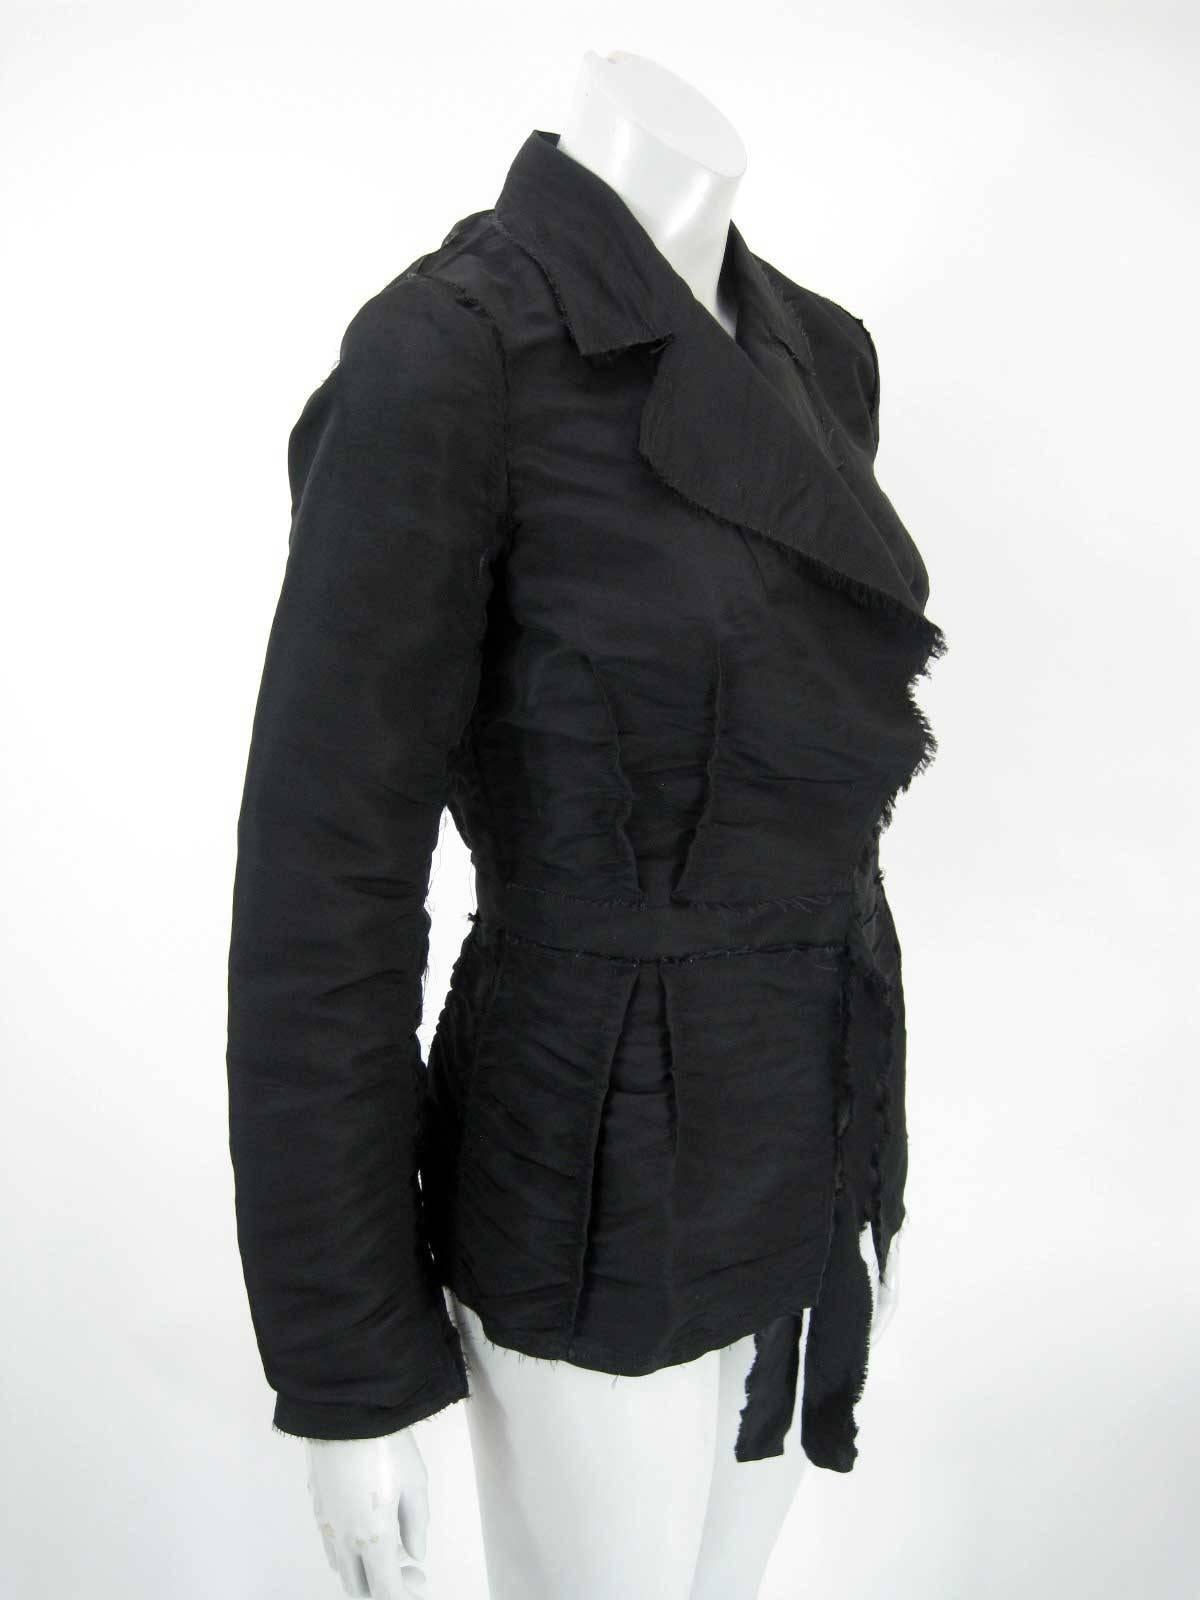 2005 Lanvin black silk wrap jacket.

Textured, ruched and pintucked silk.

Frayed hems.

Hook and eye closure and frayed self tie at waist.

Tagged size 38.

Fabric is silk.

This is in excellent pre-owned condition with no holes, stains or